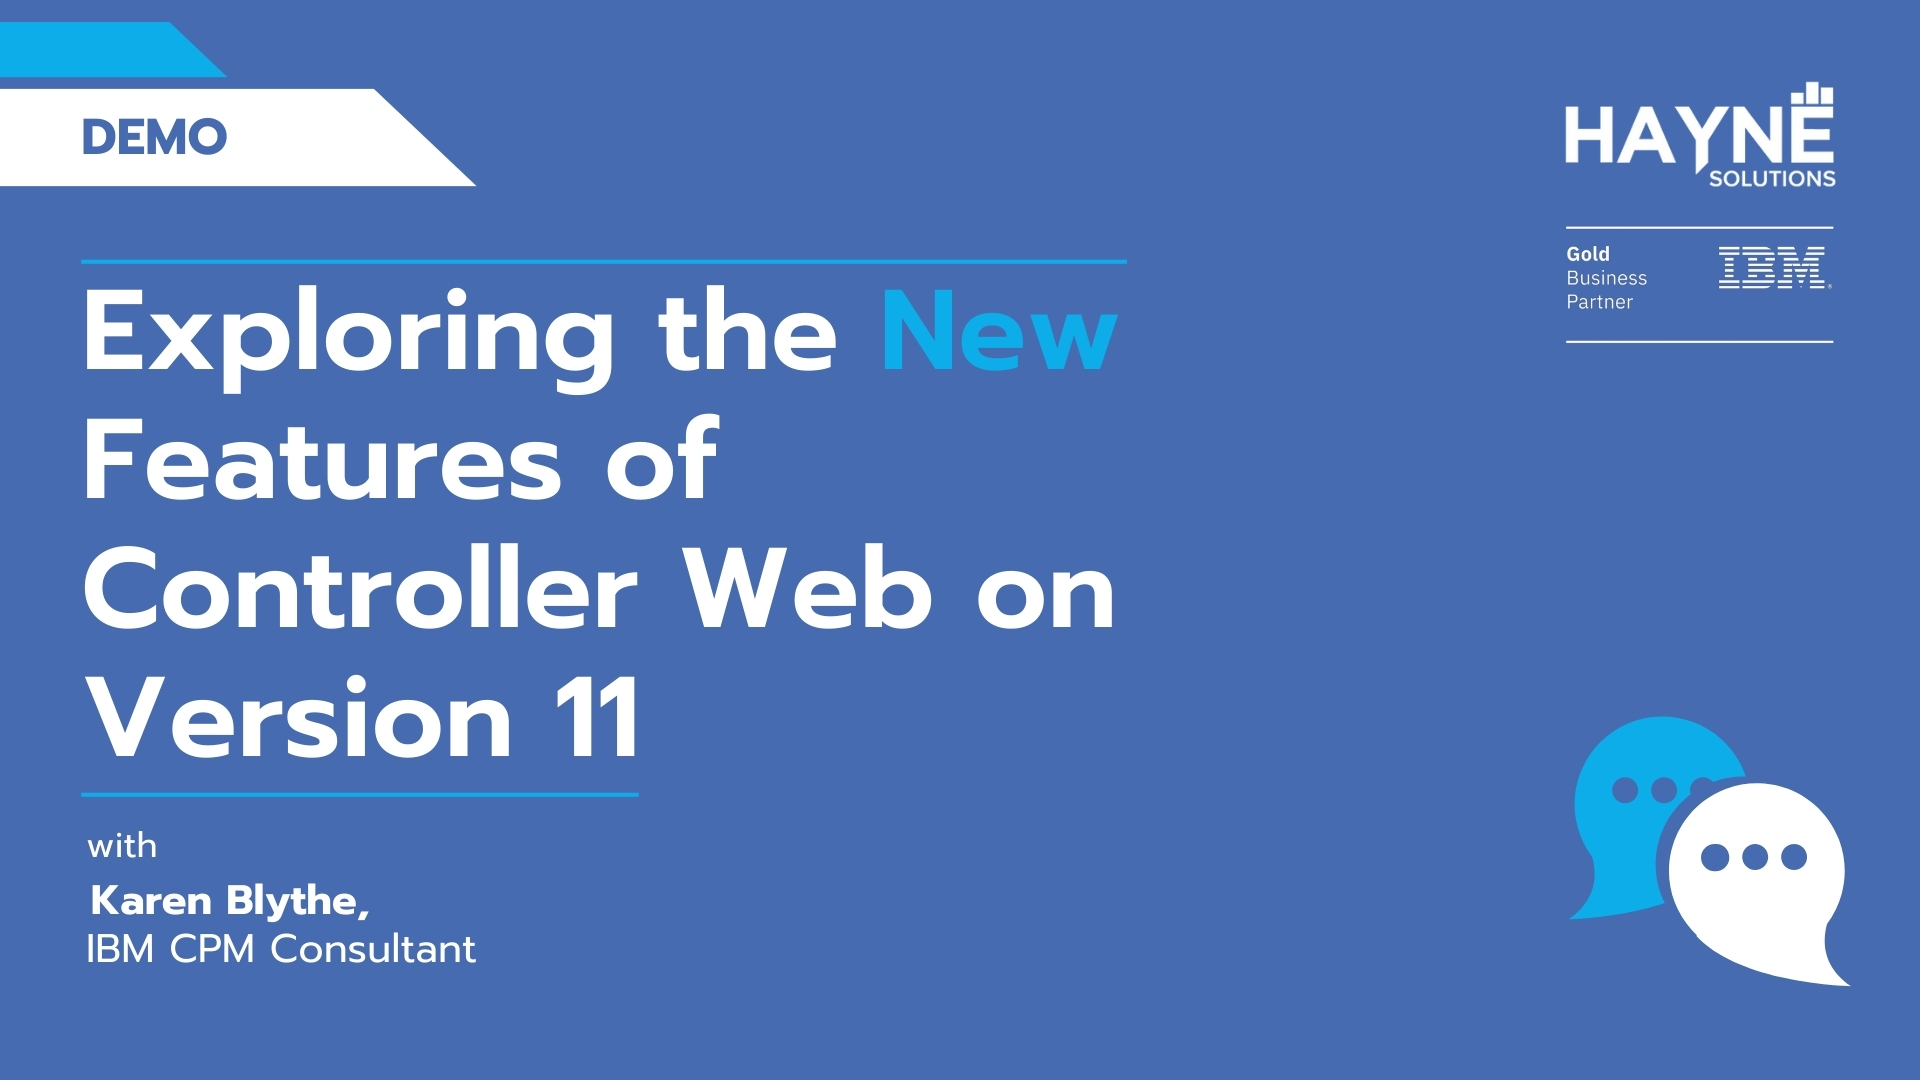 Exploring the New Features of Controller Web on Version 11 – Access our demo today